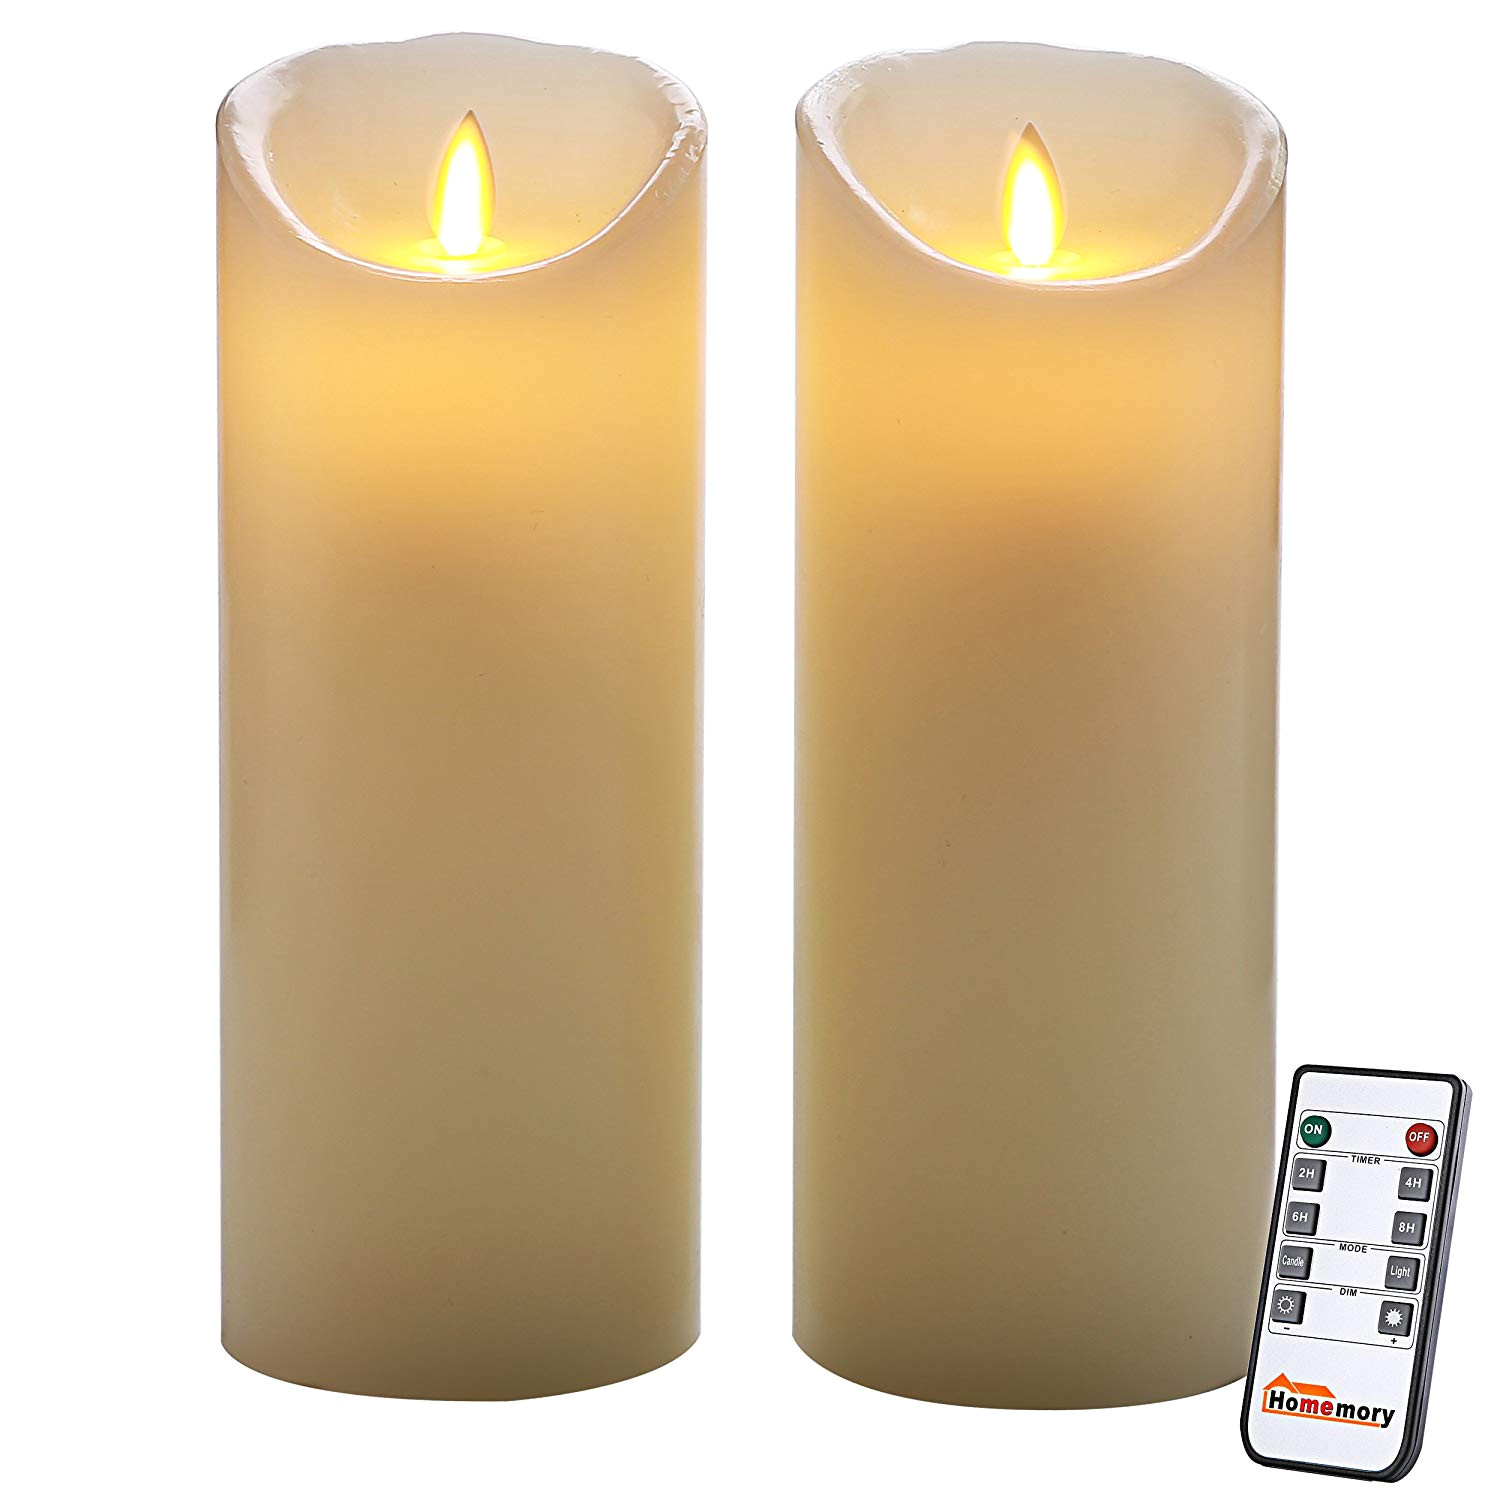 amazon com homemory 9 inch flameless timer candle with remote pack of 2 realistic led flickering votive candle power by battery electric pillar candle